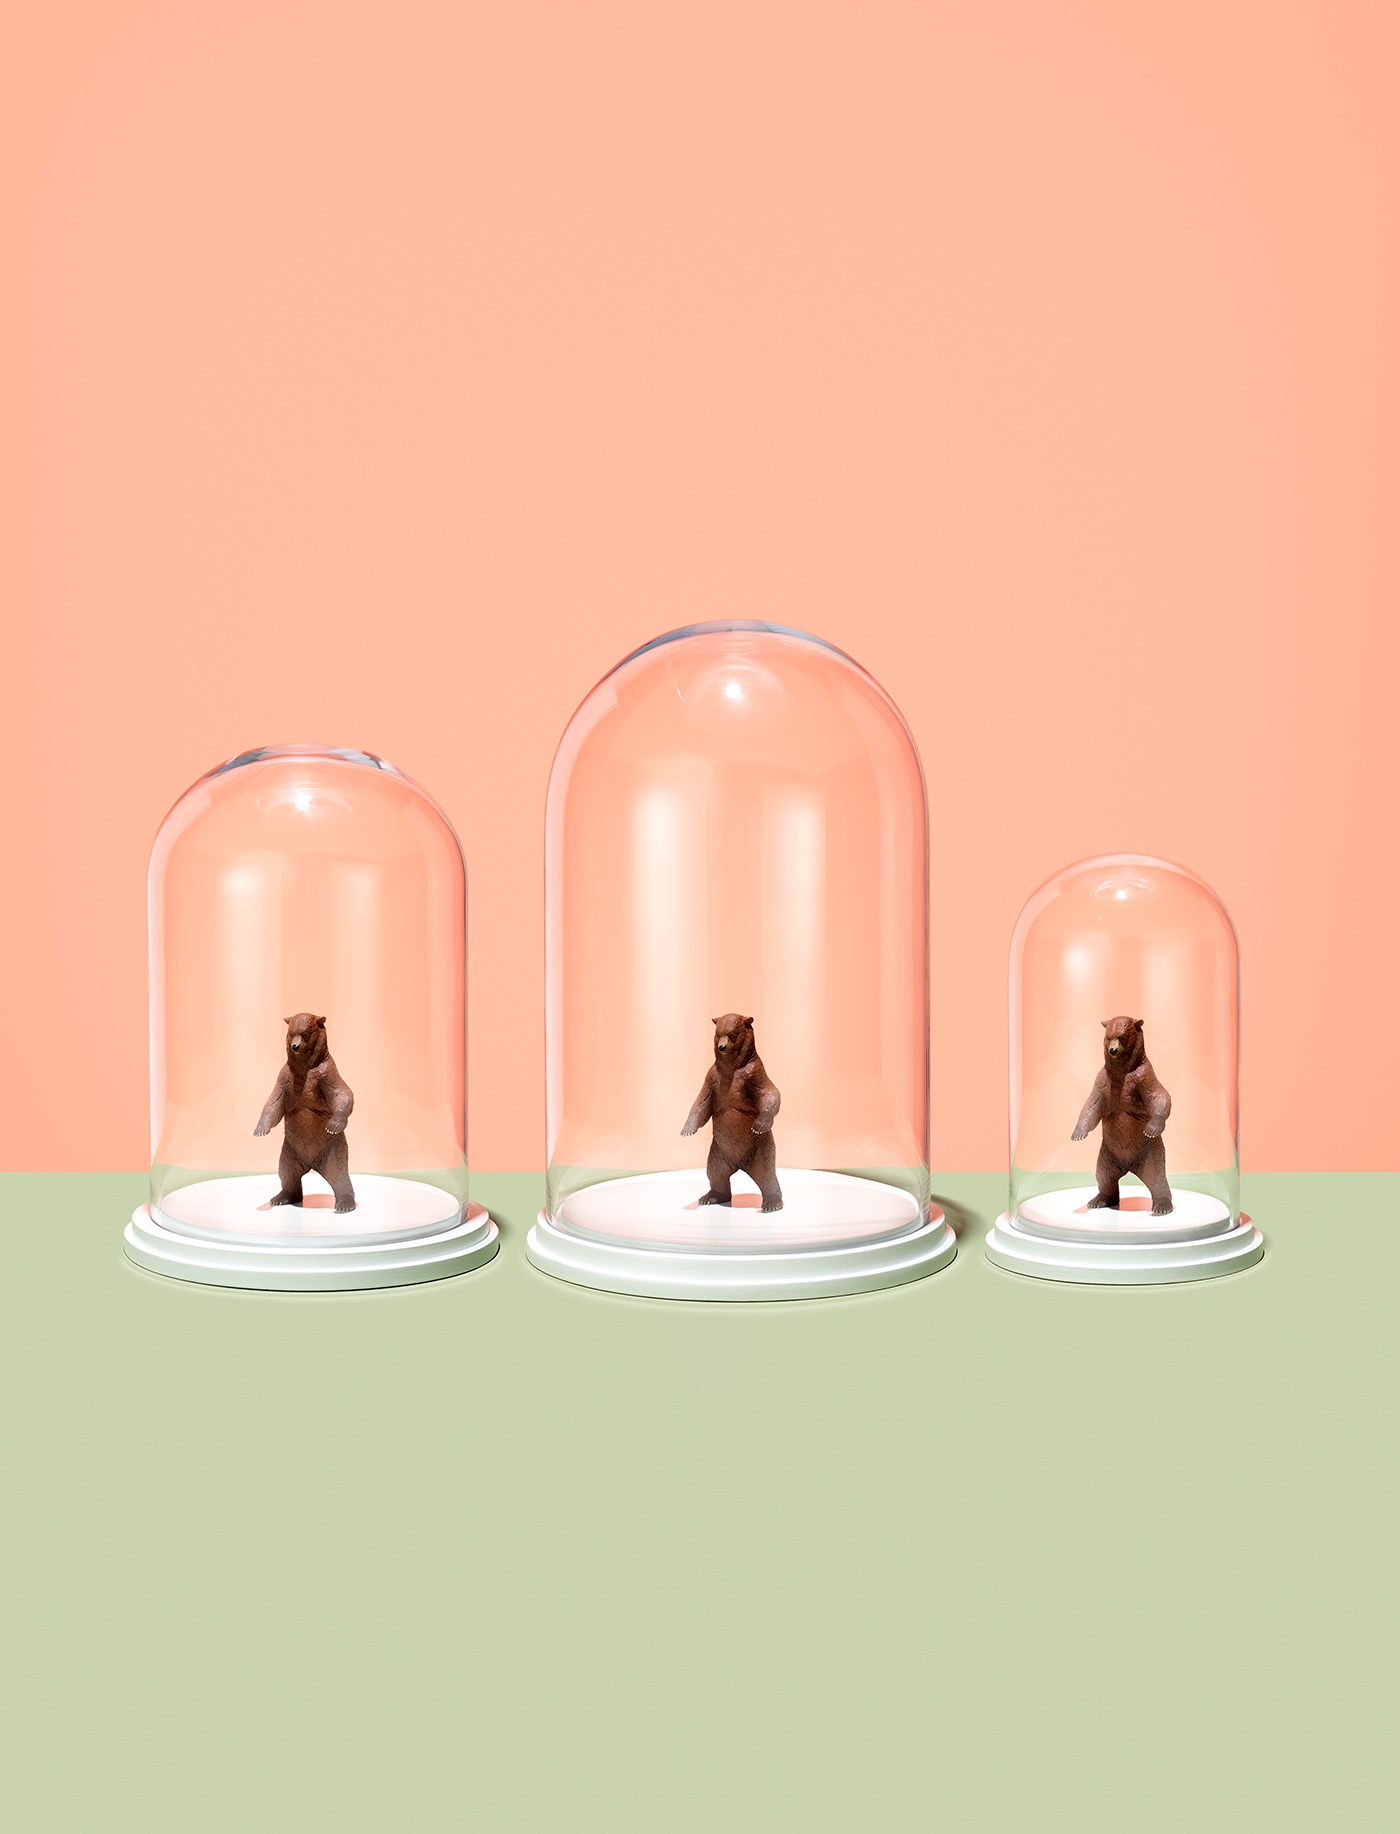 https://tickertapecdn.tdameritrade.com/assets/images/pages/md/Three dome jars spread out in a row with identical bear in each